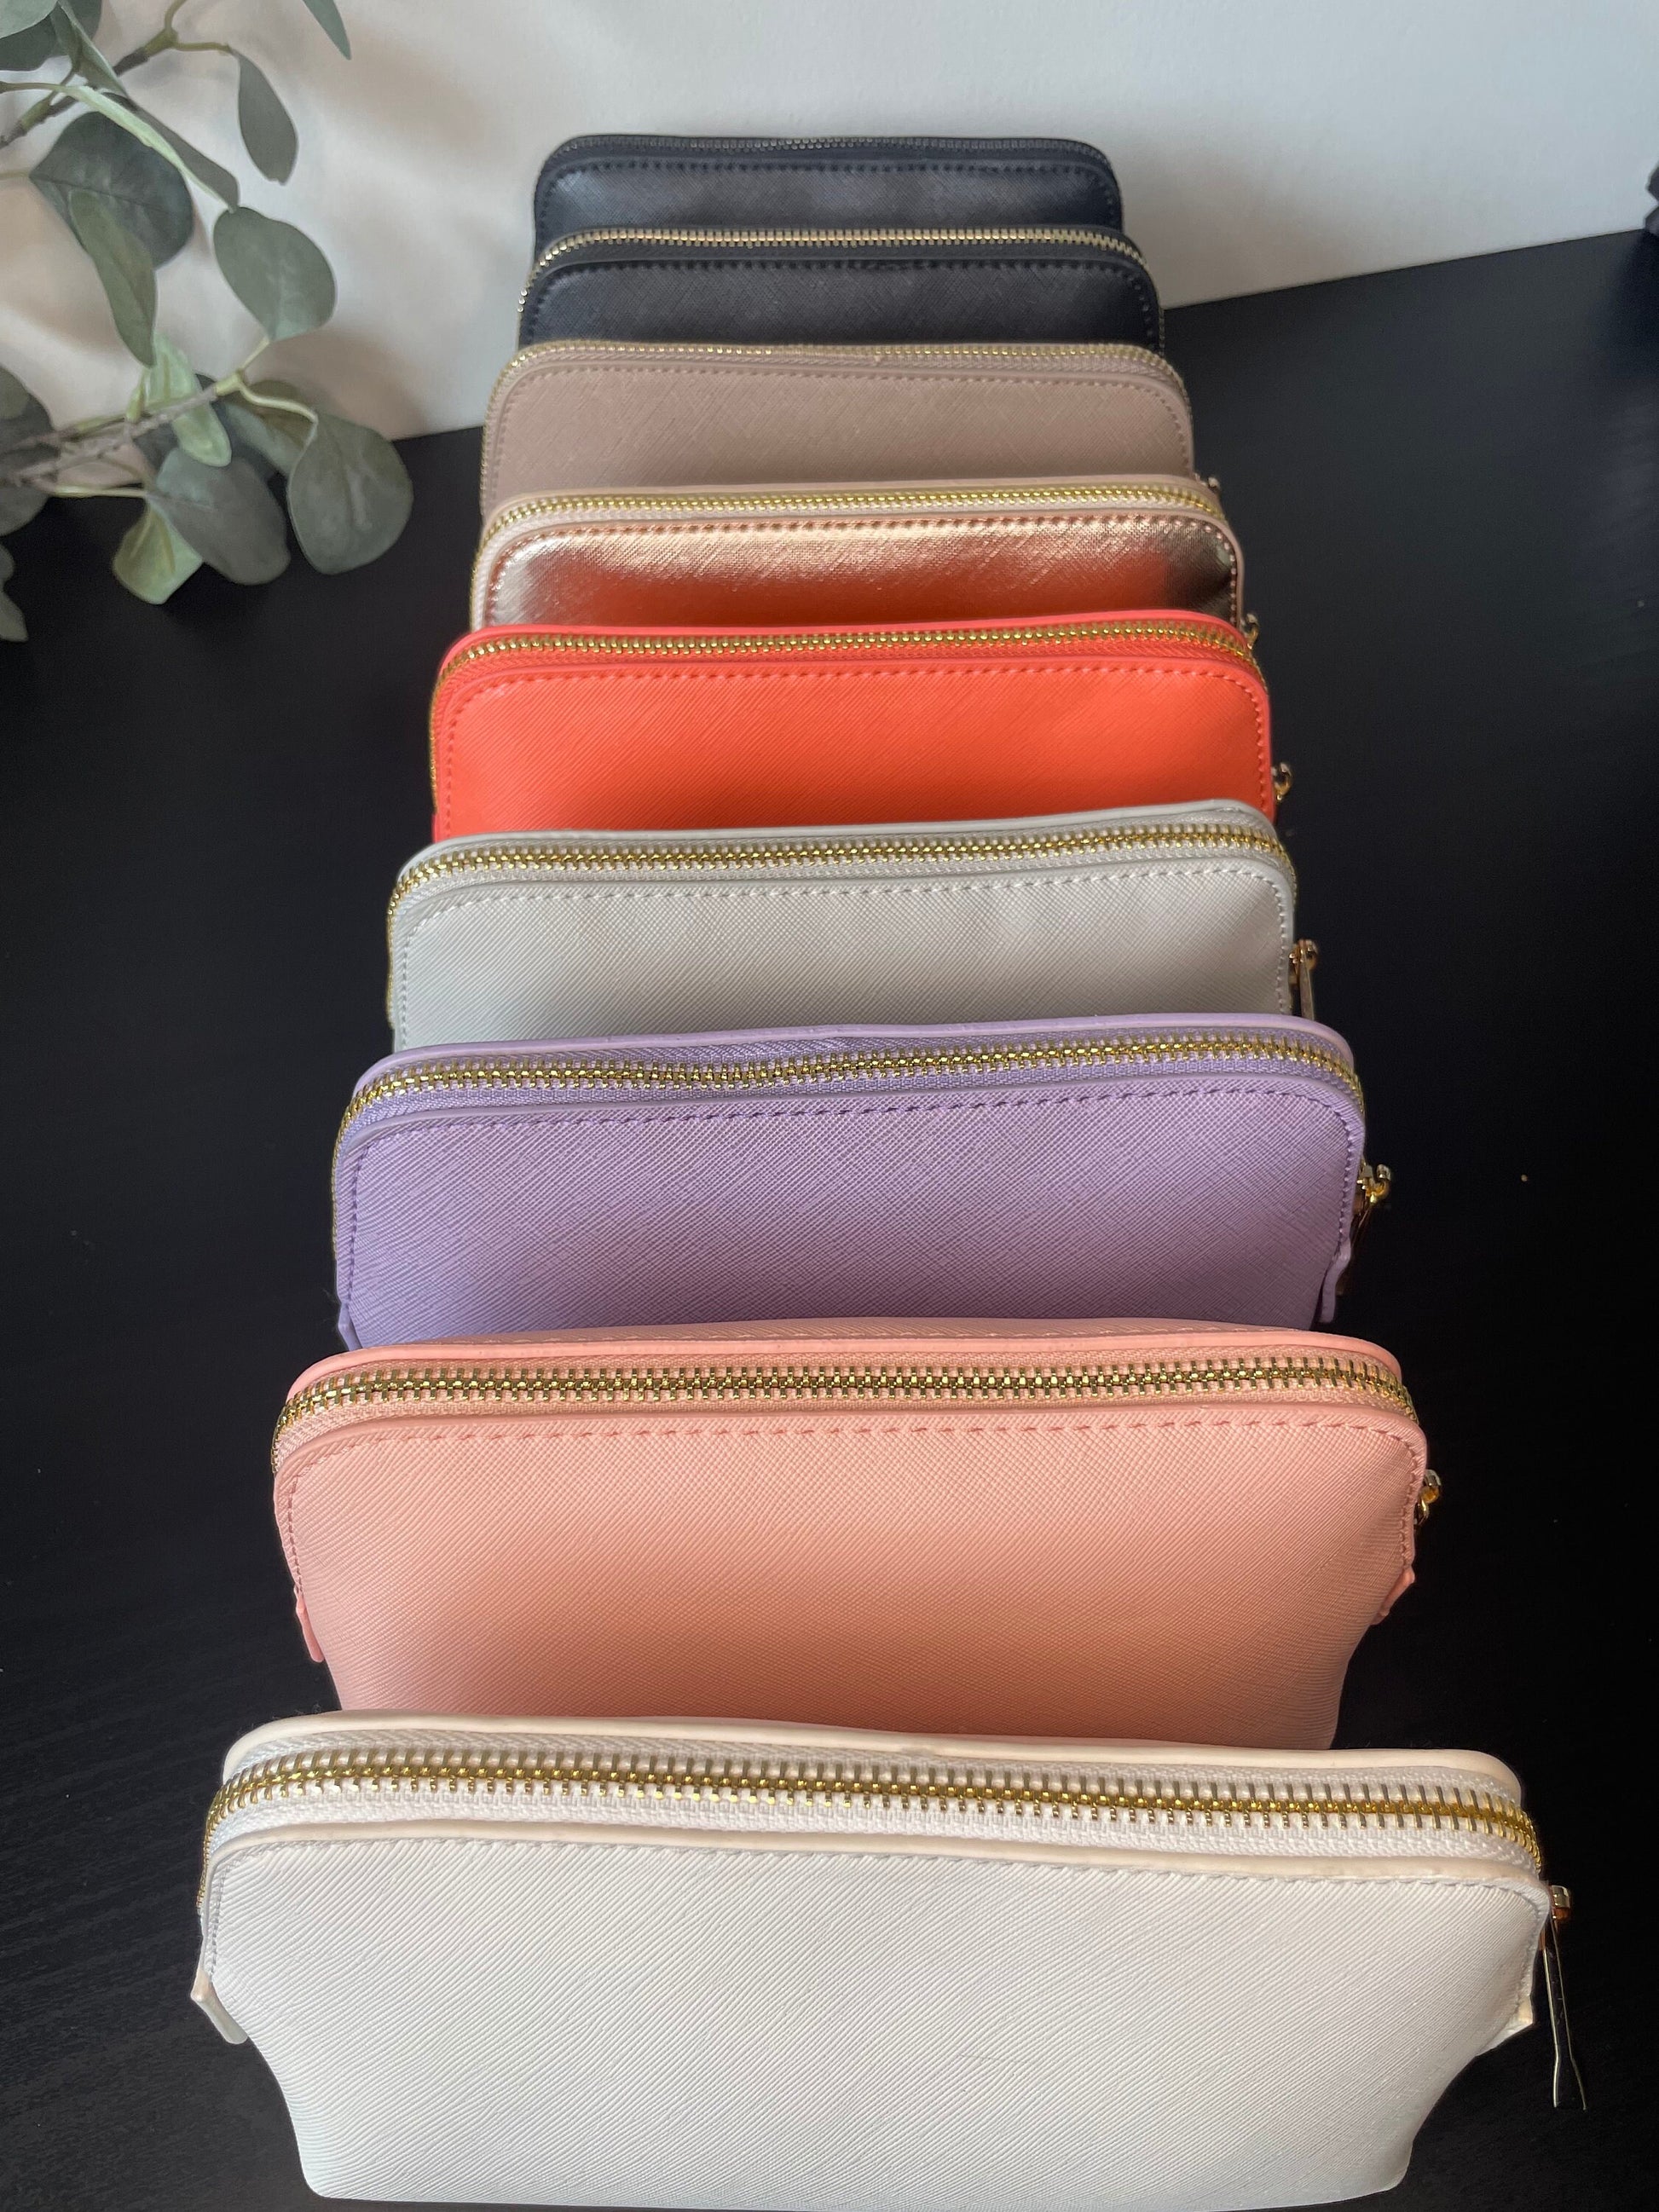 Period Bag, Faux Leather Pouch For Period Stuff, Tampon and Sanitary Pad Privacy Pouch, Period Kit For Girls, Period Emergency Make Up Bag